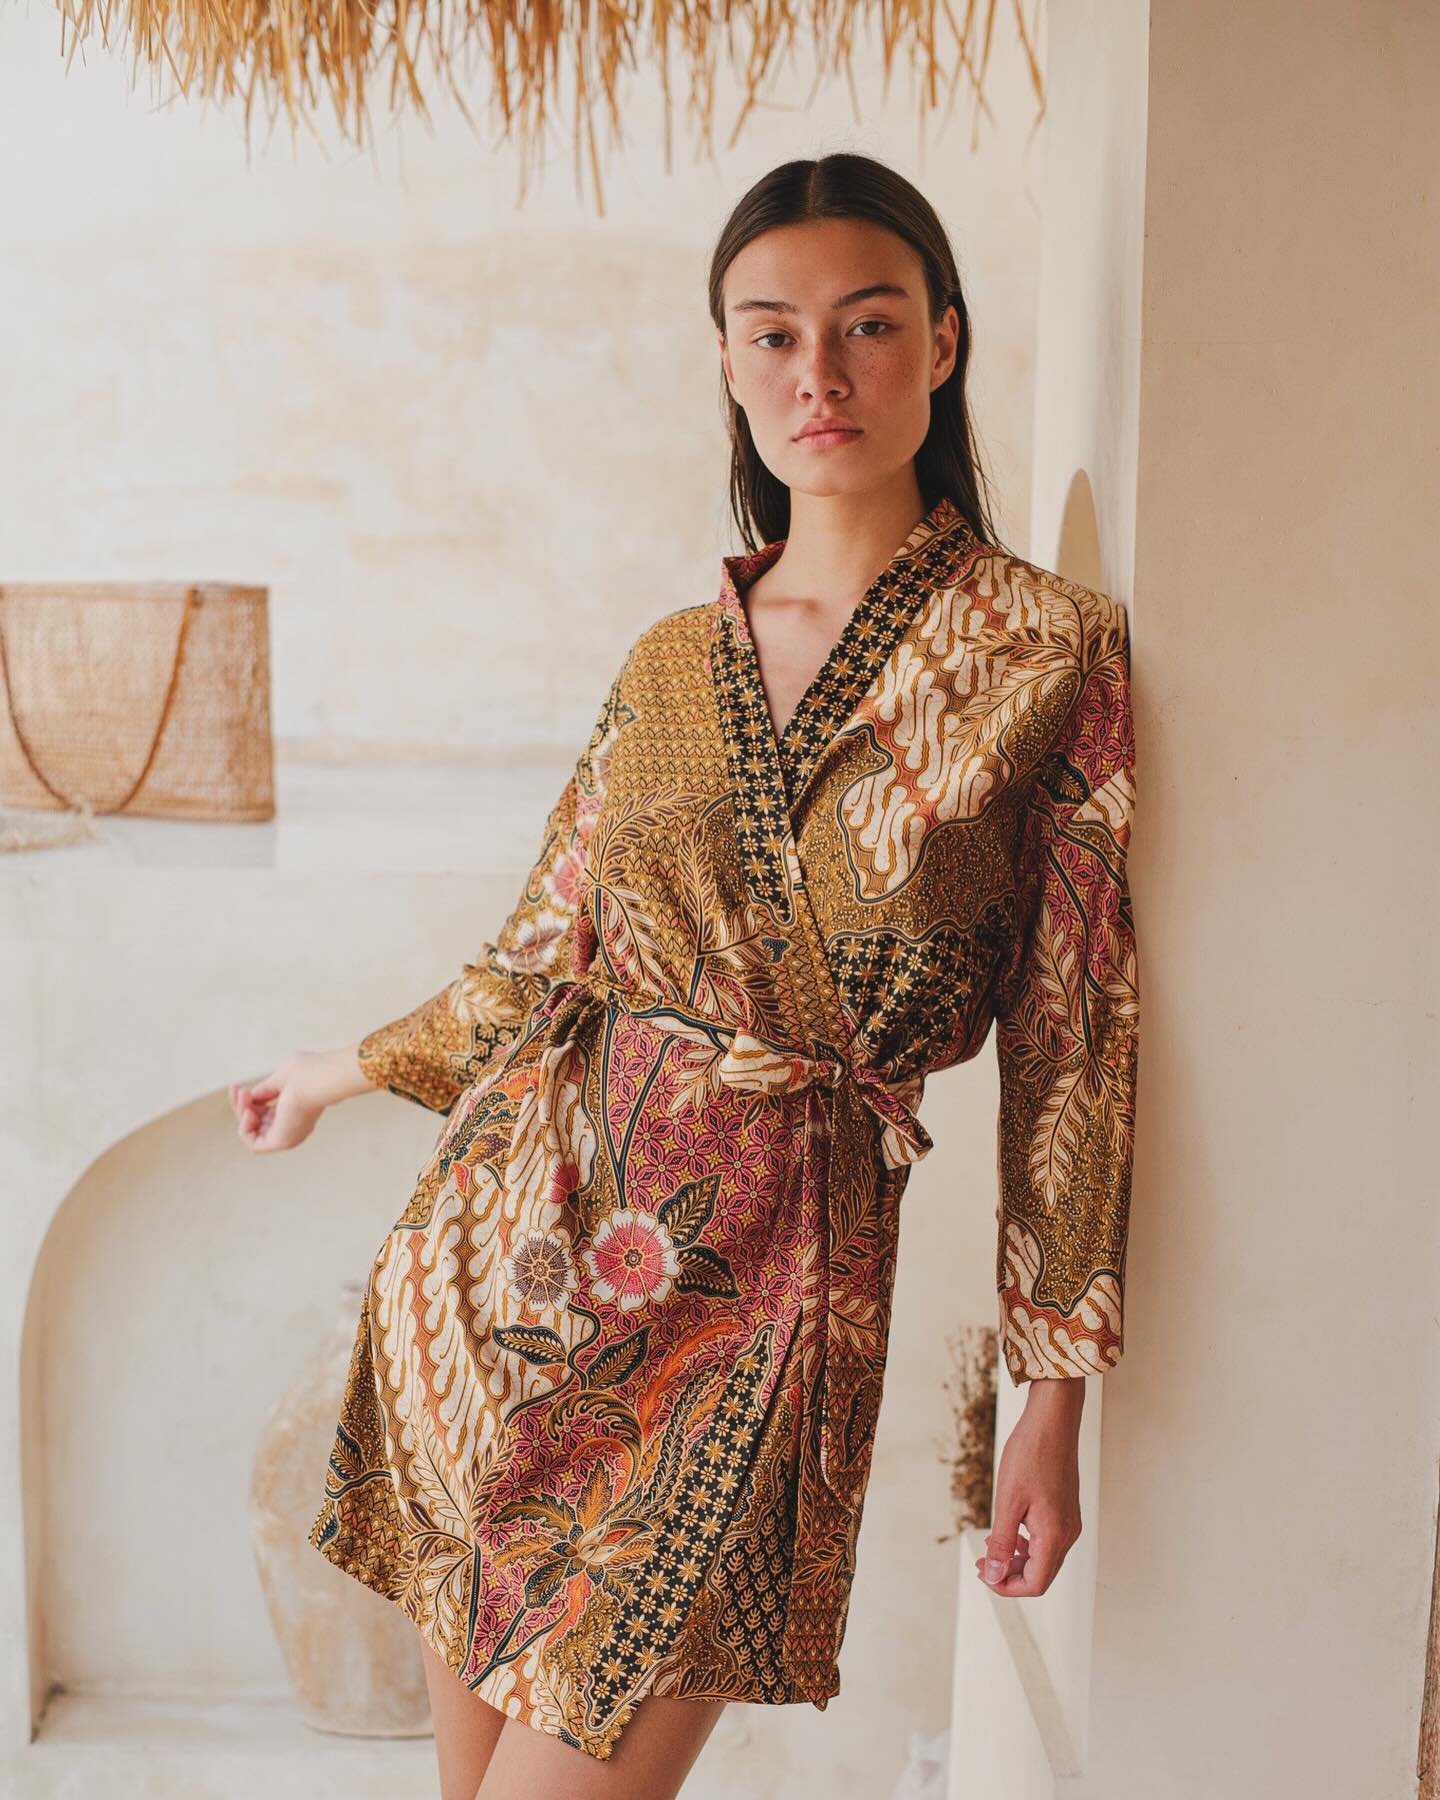 Bega kimono robe is a harmonious blend of softness and sophistication 👘 

Crafted in gentle pink, gold and beige tones, the BEGA kimono robe exudes a sense of tranquility and femininity. Its soft hues envelop you in a cocoon of comfort, offering a s